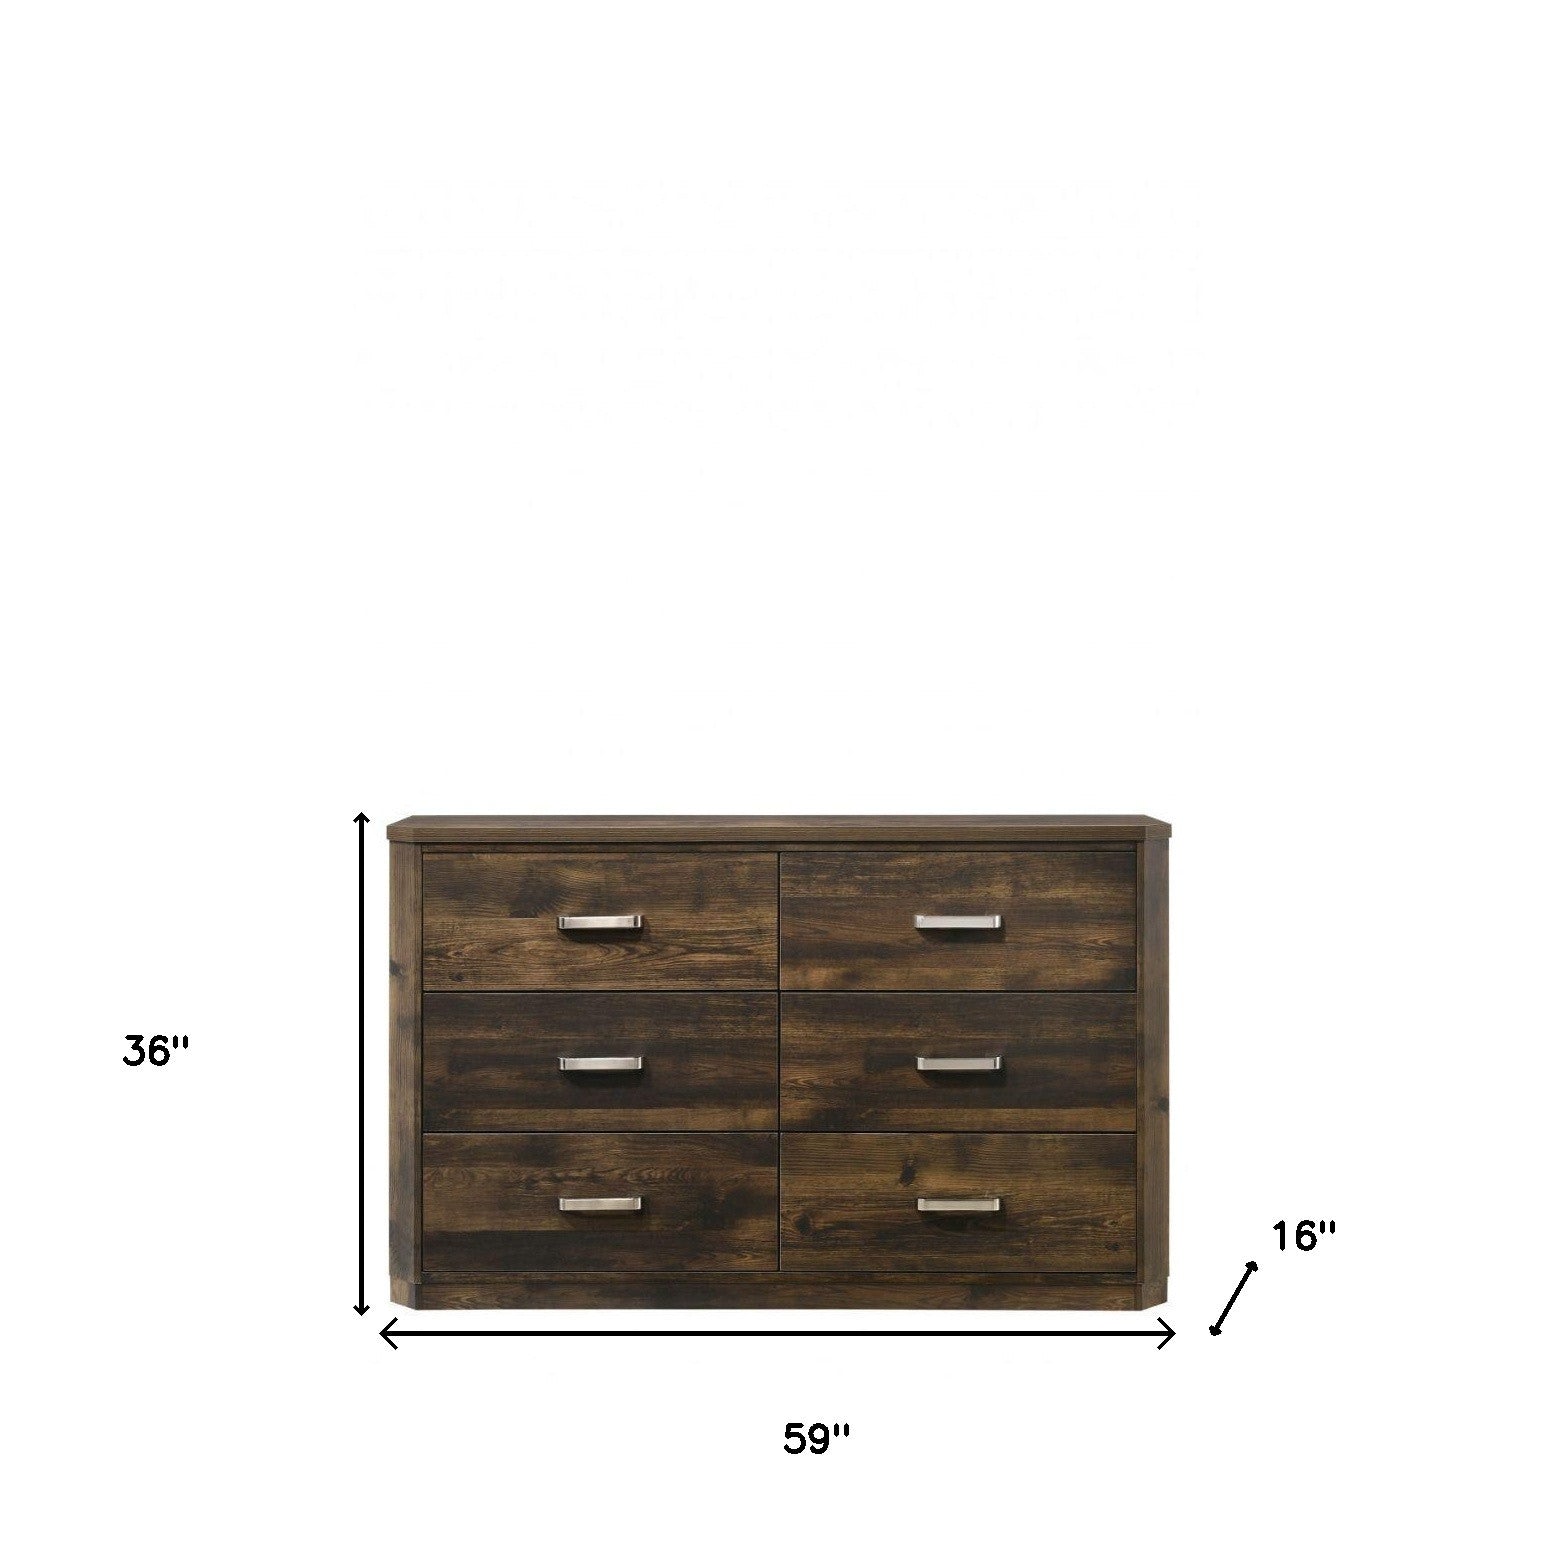 59" Dark Brown Solid and Manufactured Wood Six Drawer Double Dresser